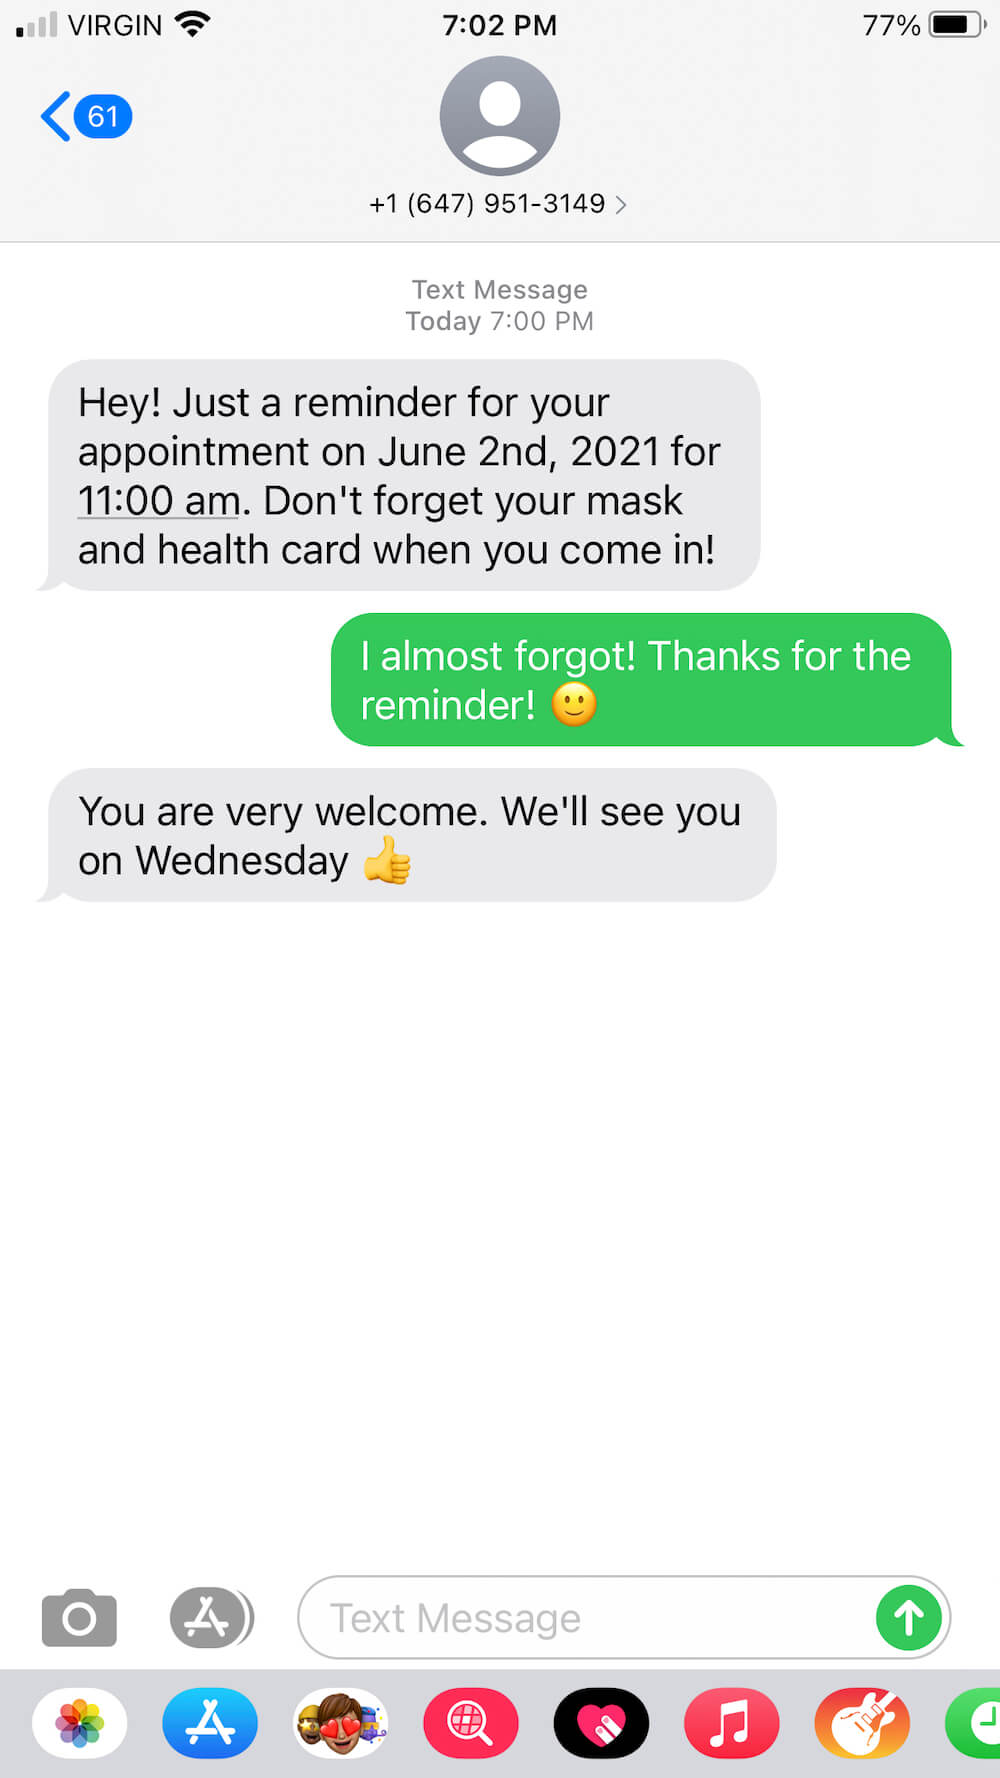 Automating Appointment Reminders